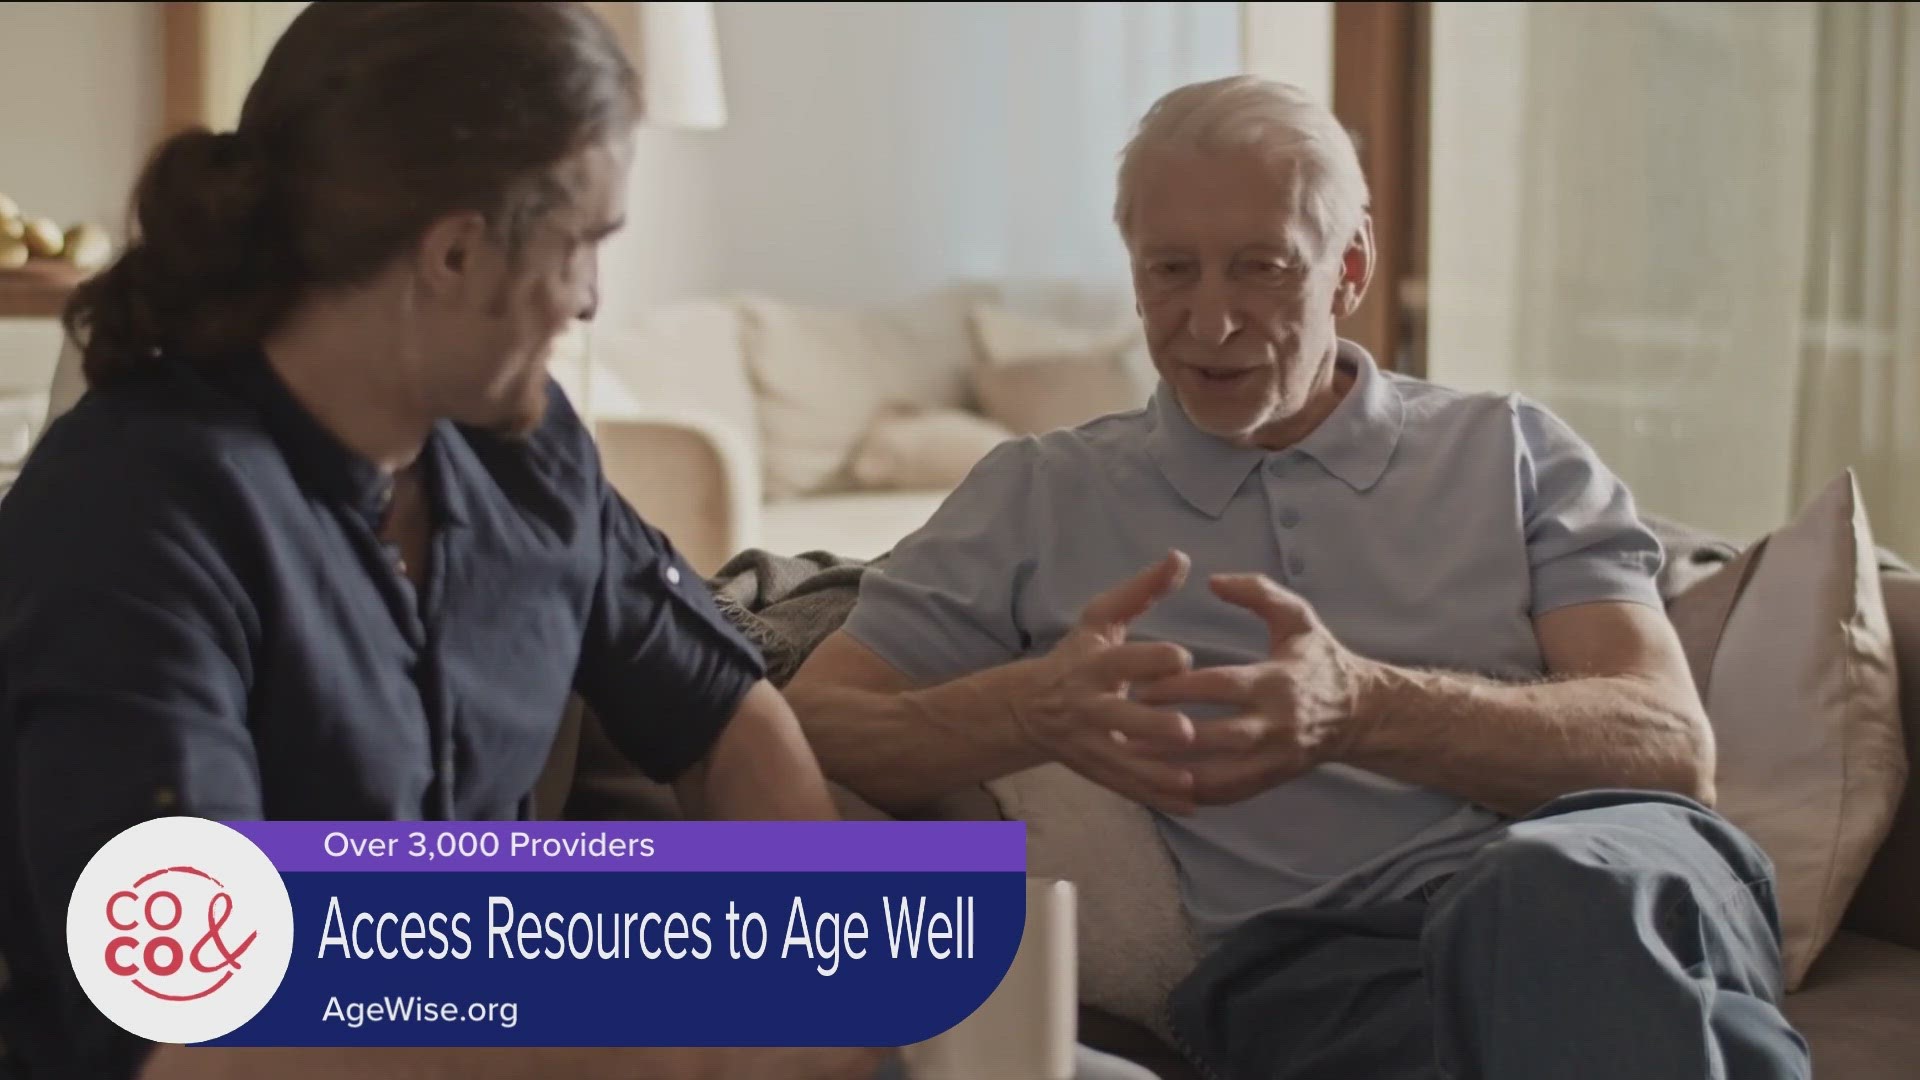 AgeWise is there to support older adults and loved ones/caregivers. Learn more and access resources at AgeWiseColorado.org.